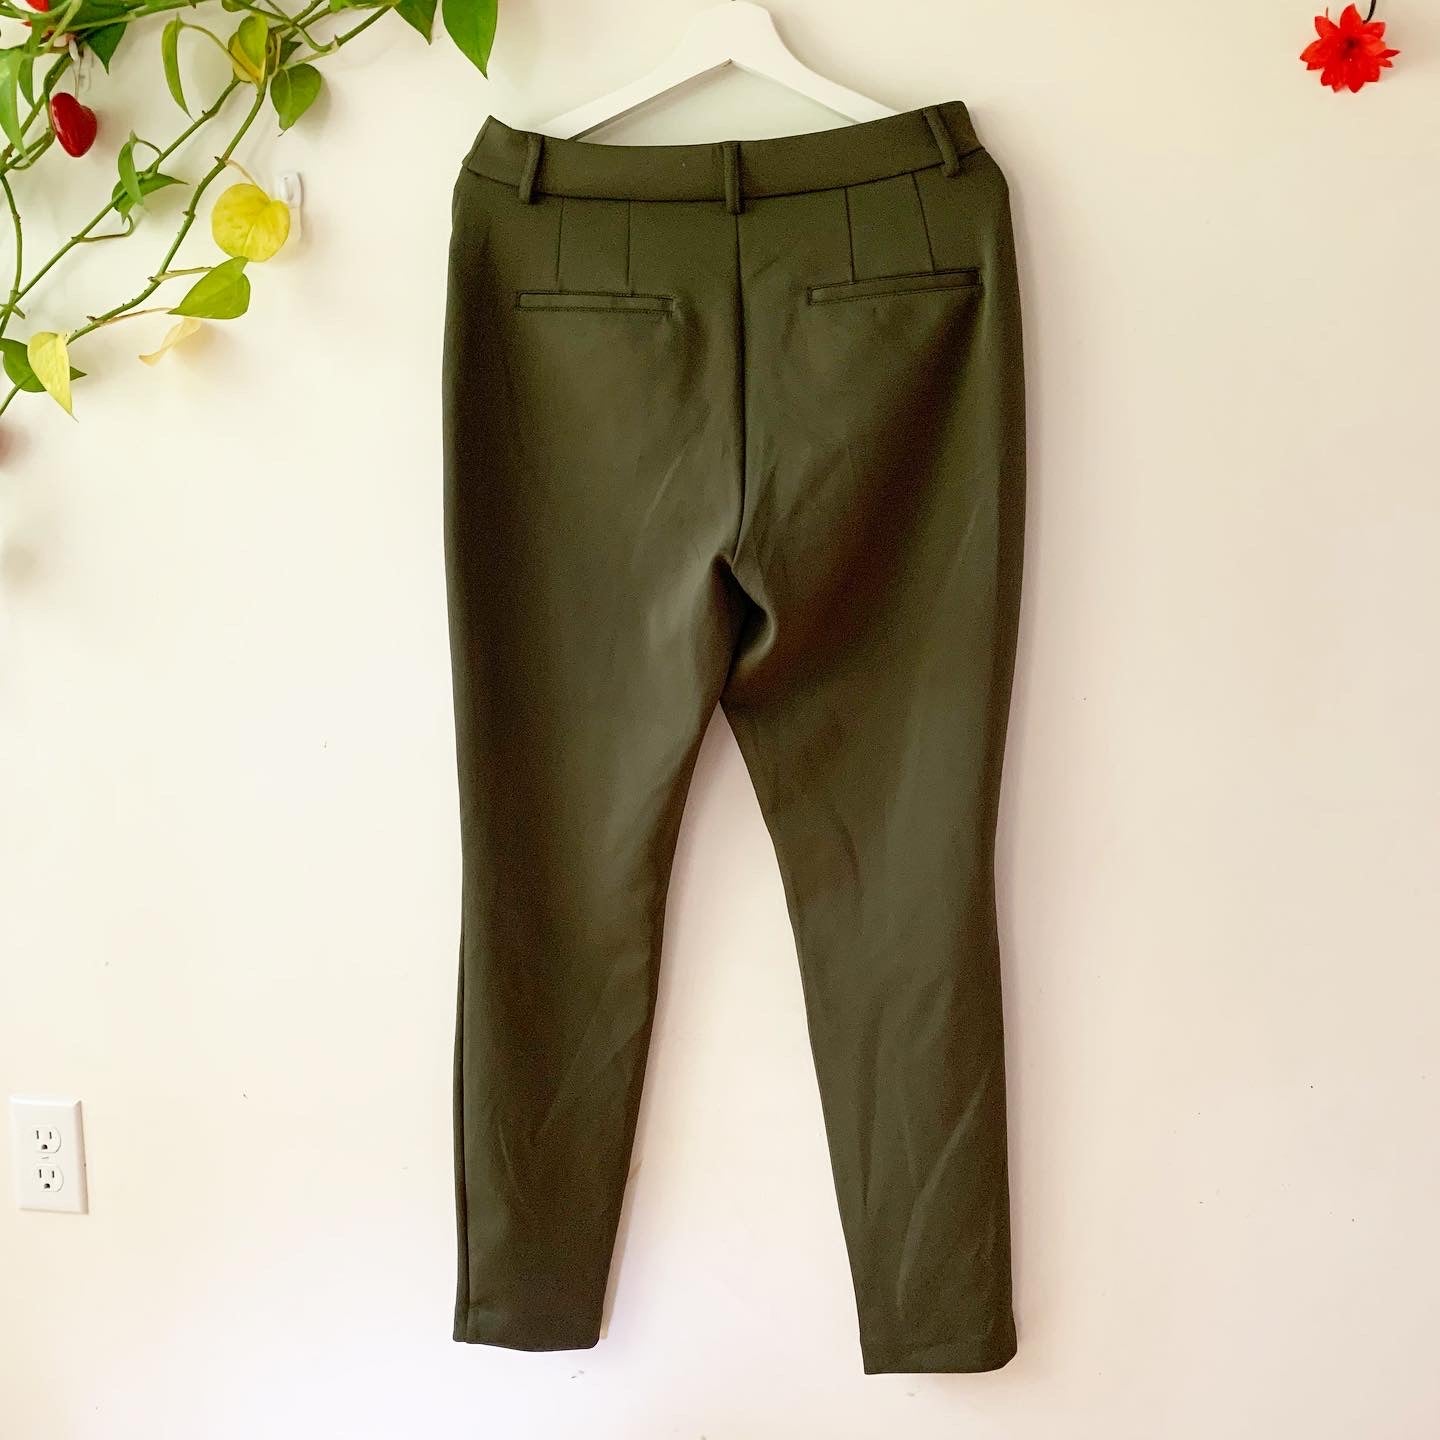 Express Supersoft Double Knit High Rise Olive Green Skinny Pants, Size Medium